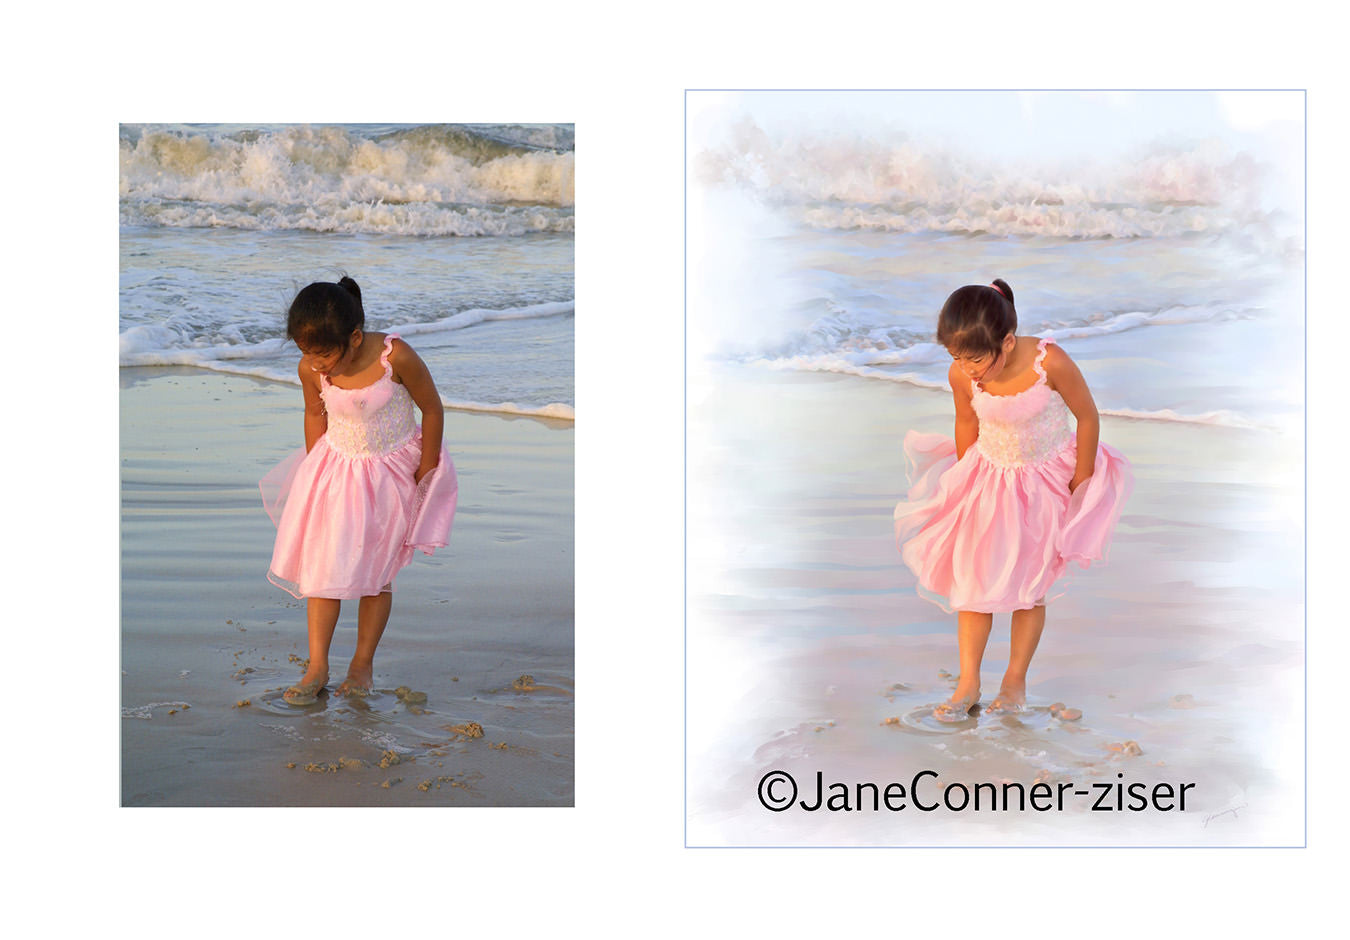 Original picture of a little girl in a pink dress vs a digital version